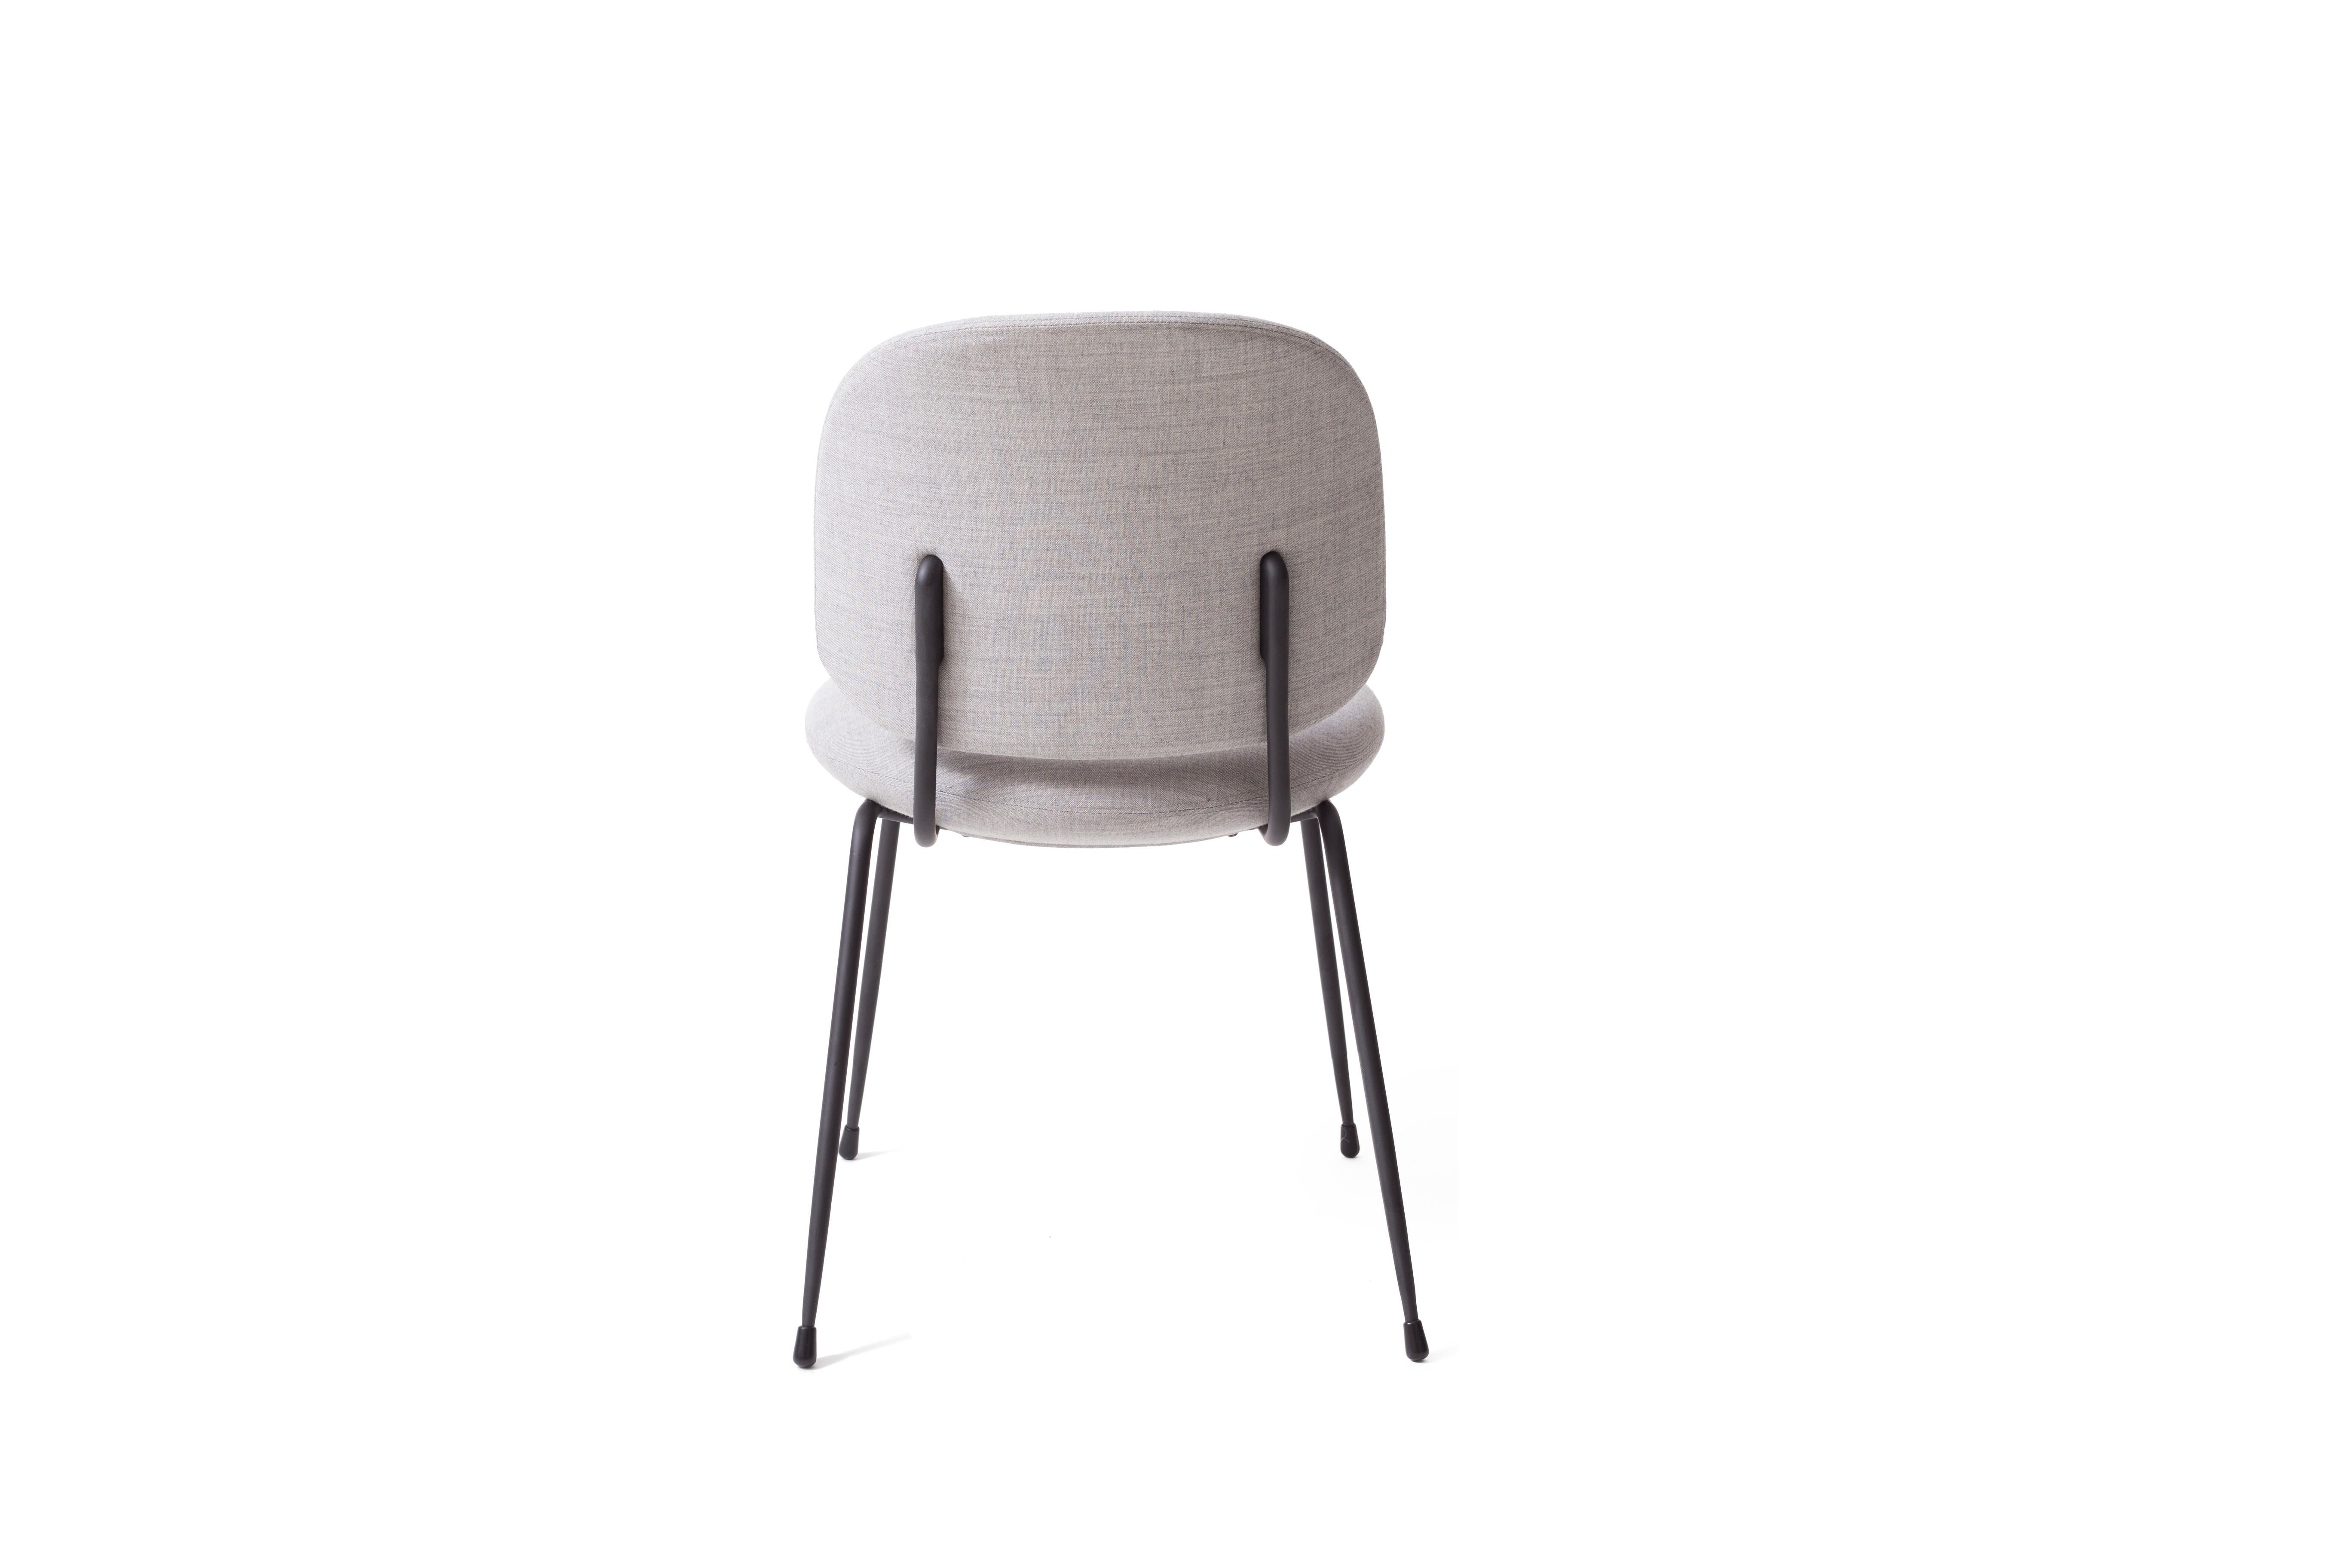 The industry dining chair by Stellar Works has a sculptural feel that is at home in a range of locations. This utilitarian-inspired chair balances a comfortable, upholstered back and seat cushions with the bold nature of steel, while the lack of